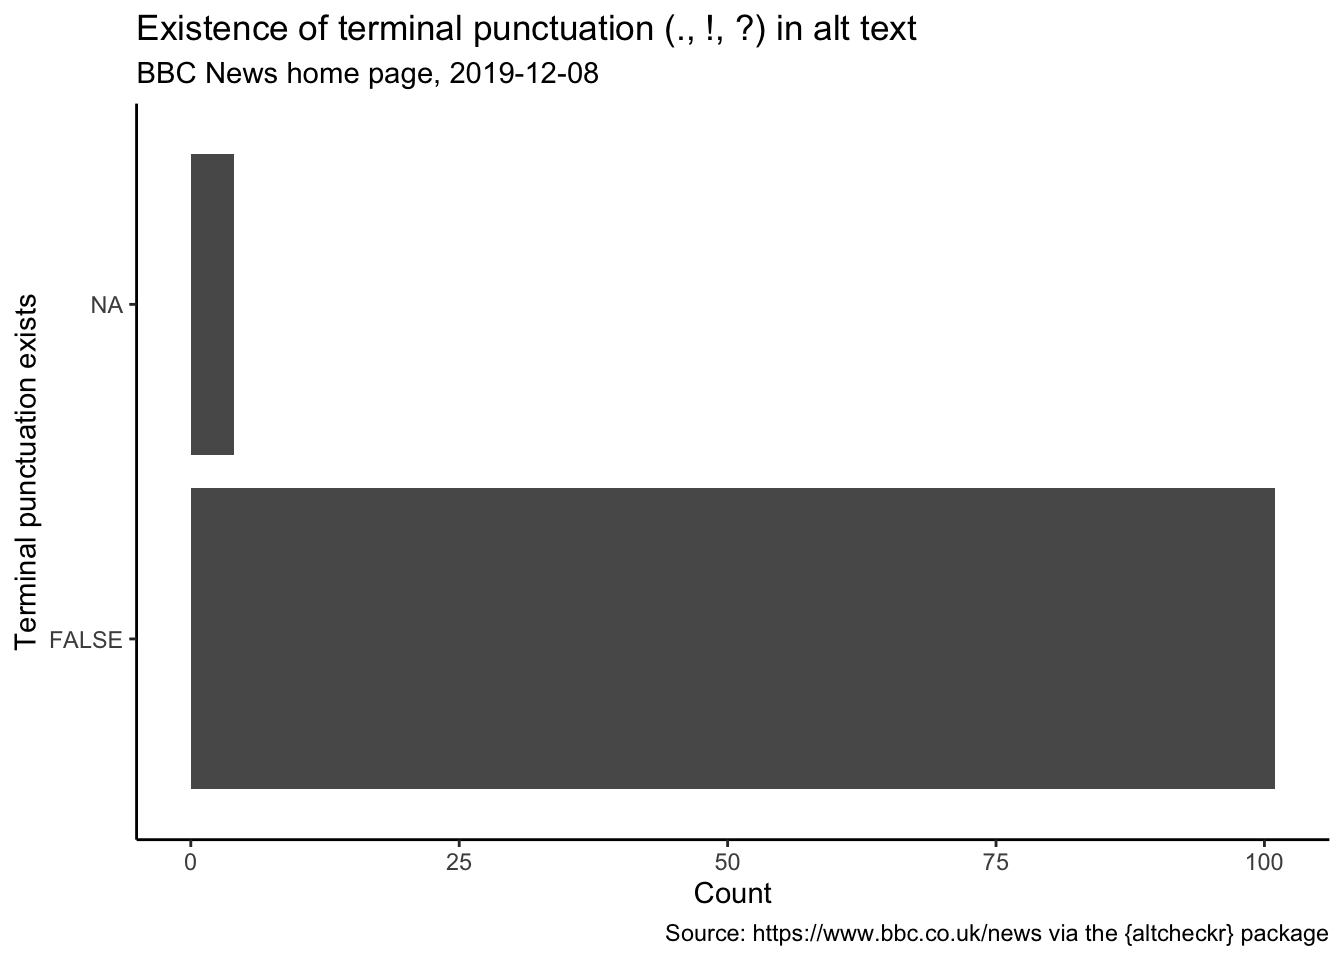 Bar chart showing presence of terminal punctuation in alt text. About 100 alt texts did not have terminal punctuation and only a couple did.